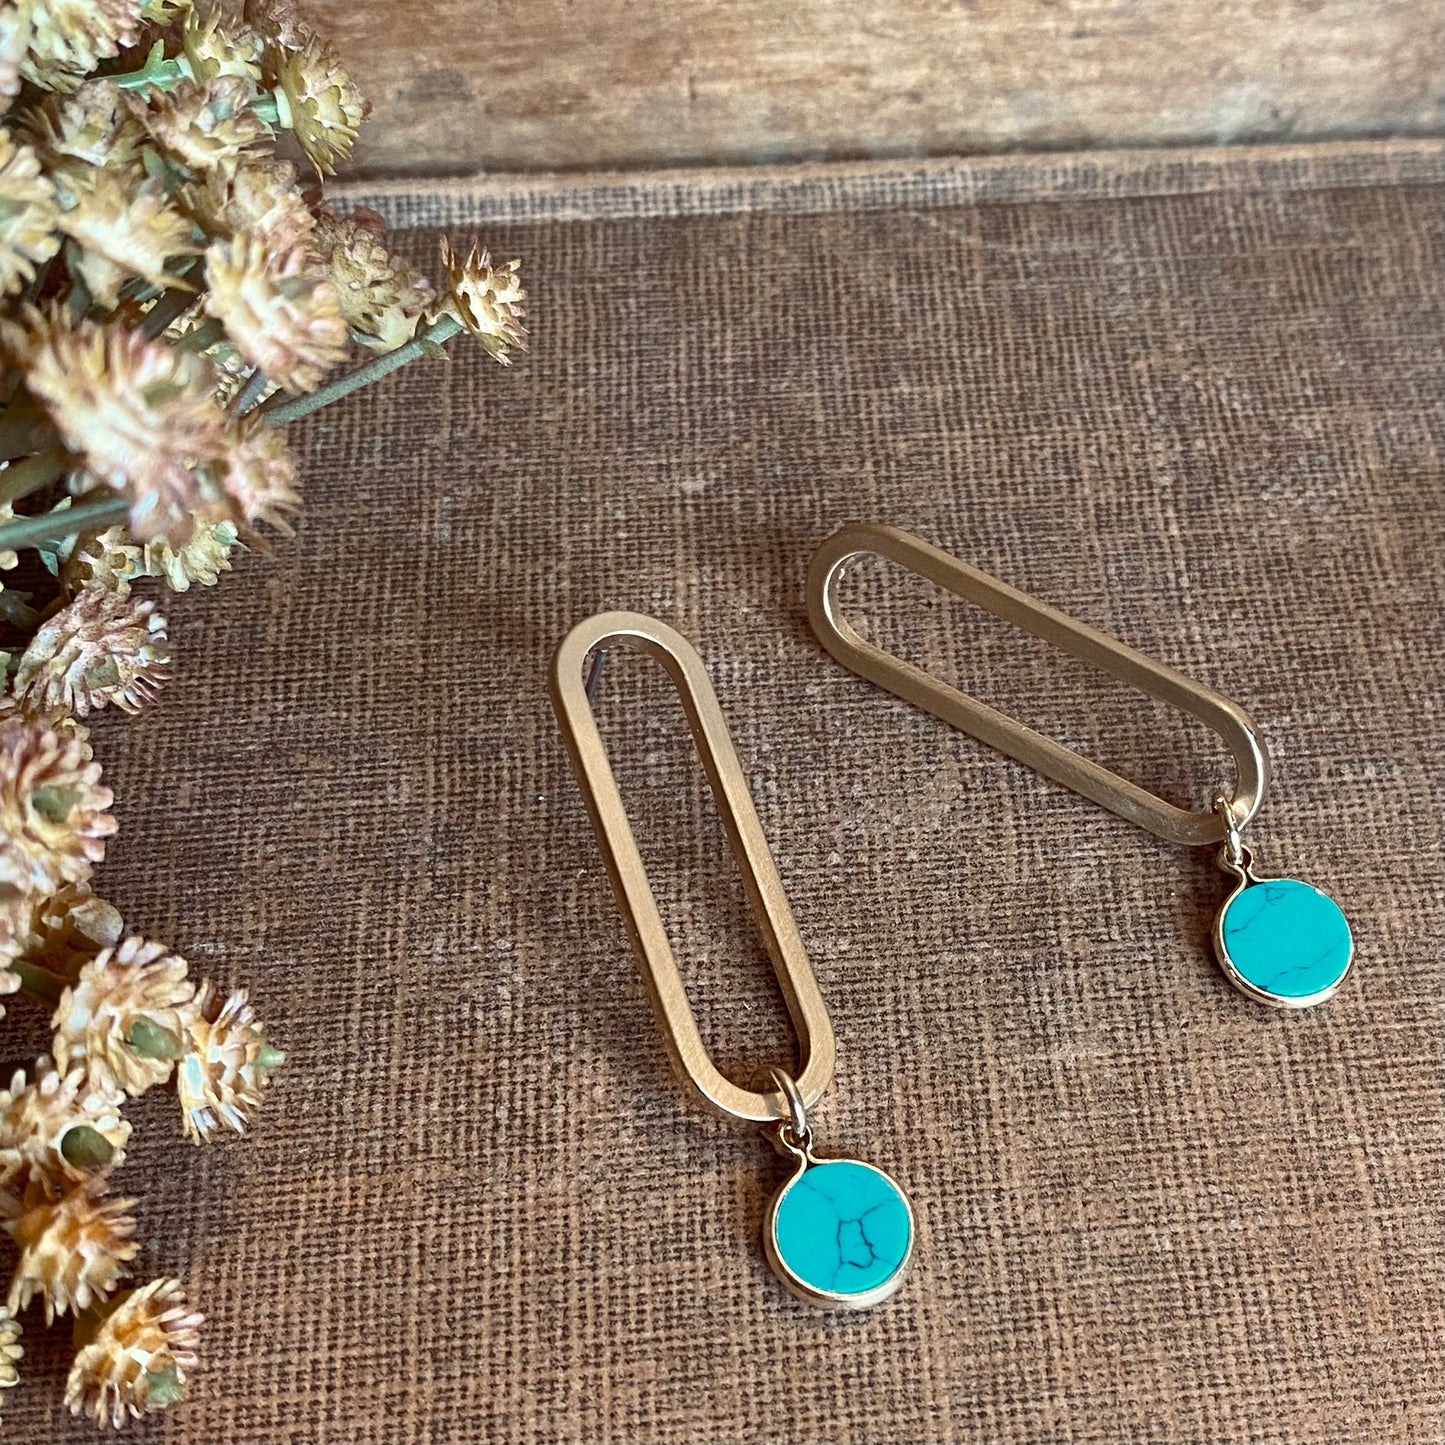 Missing Link Gold/Turquoise Earrings